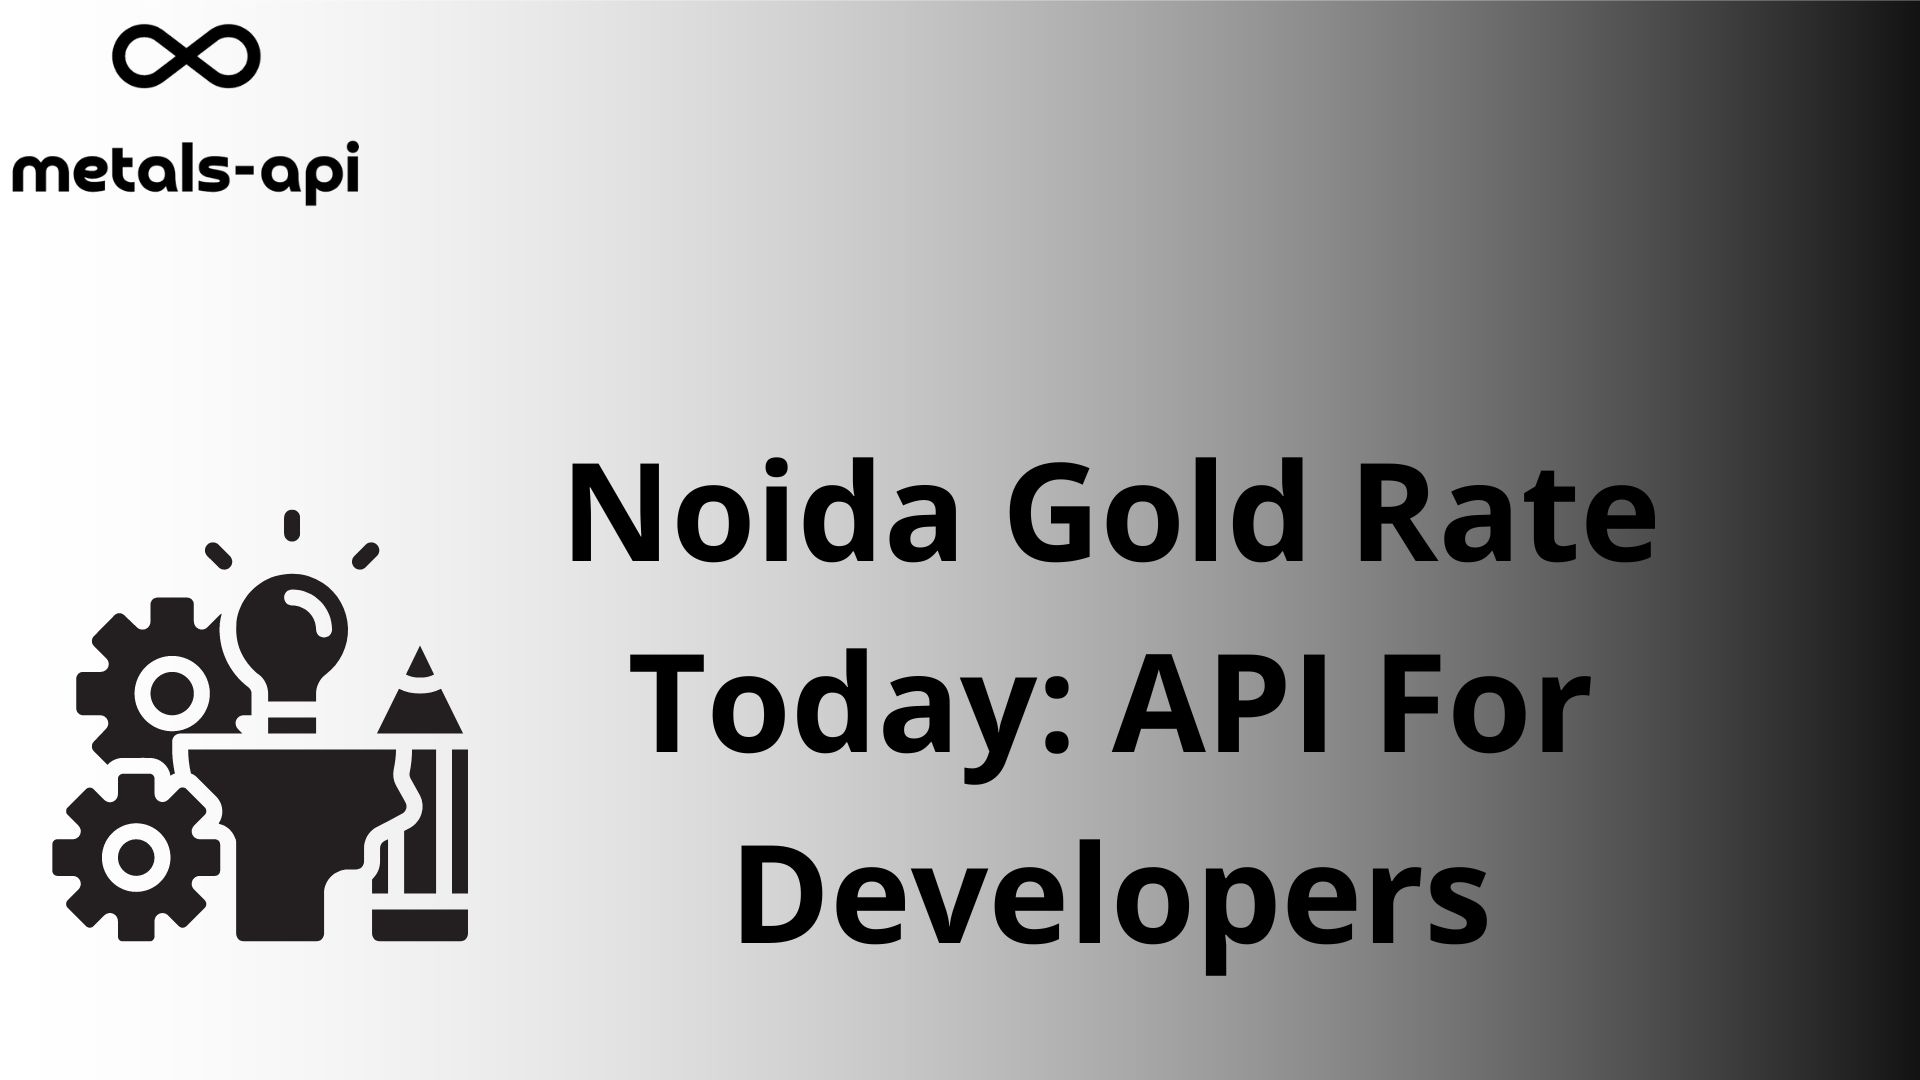 Noida Gold Rate Today: API For Developers